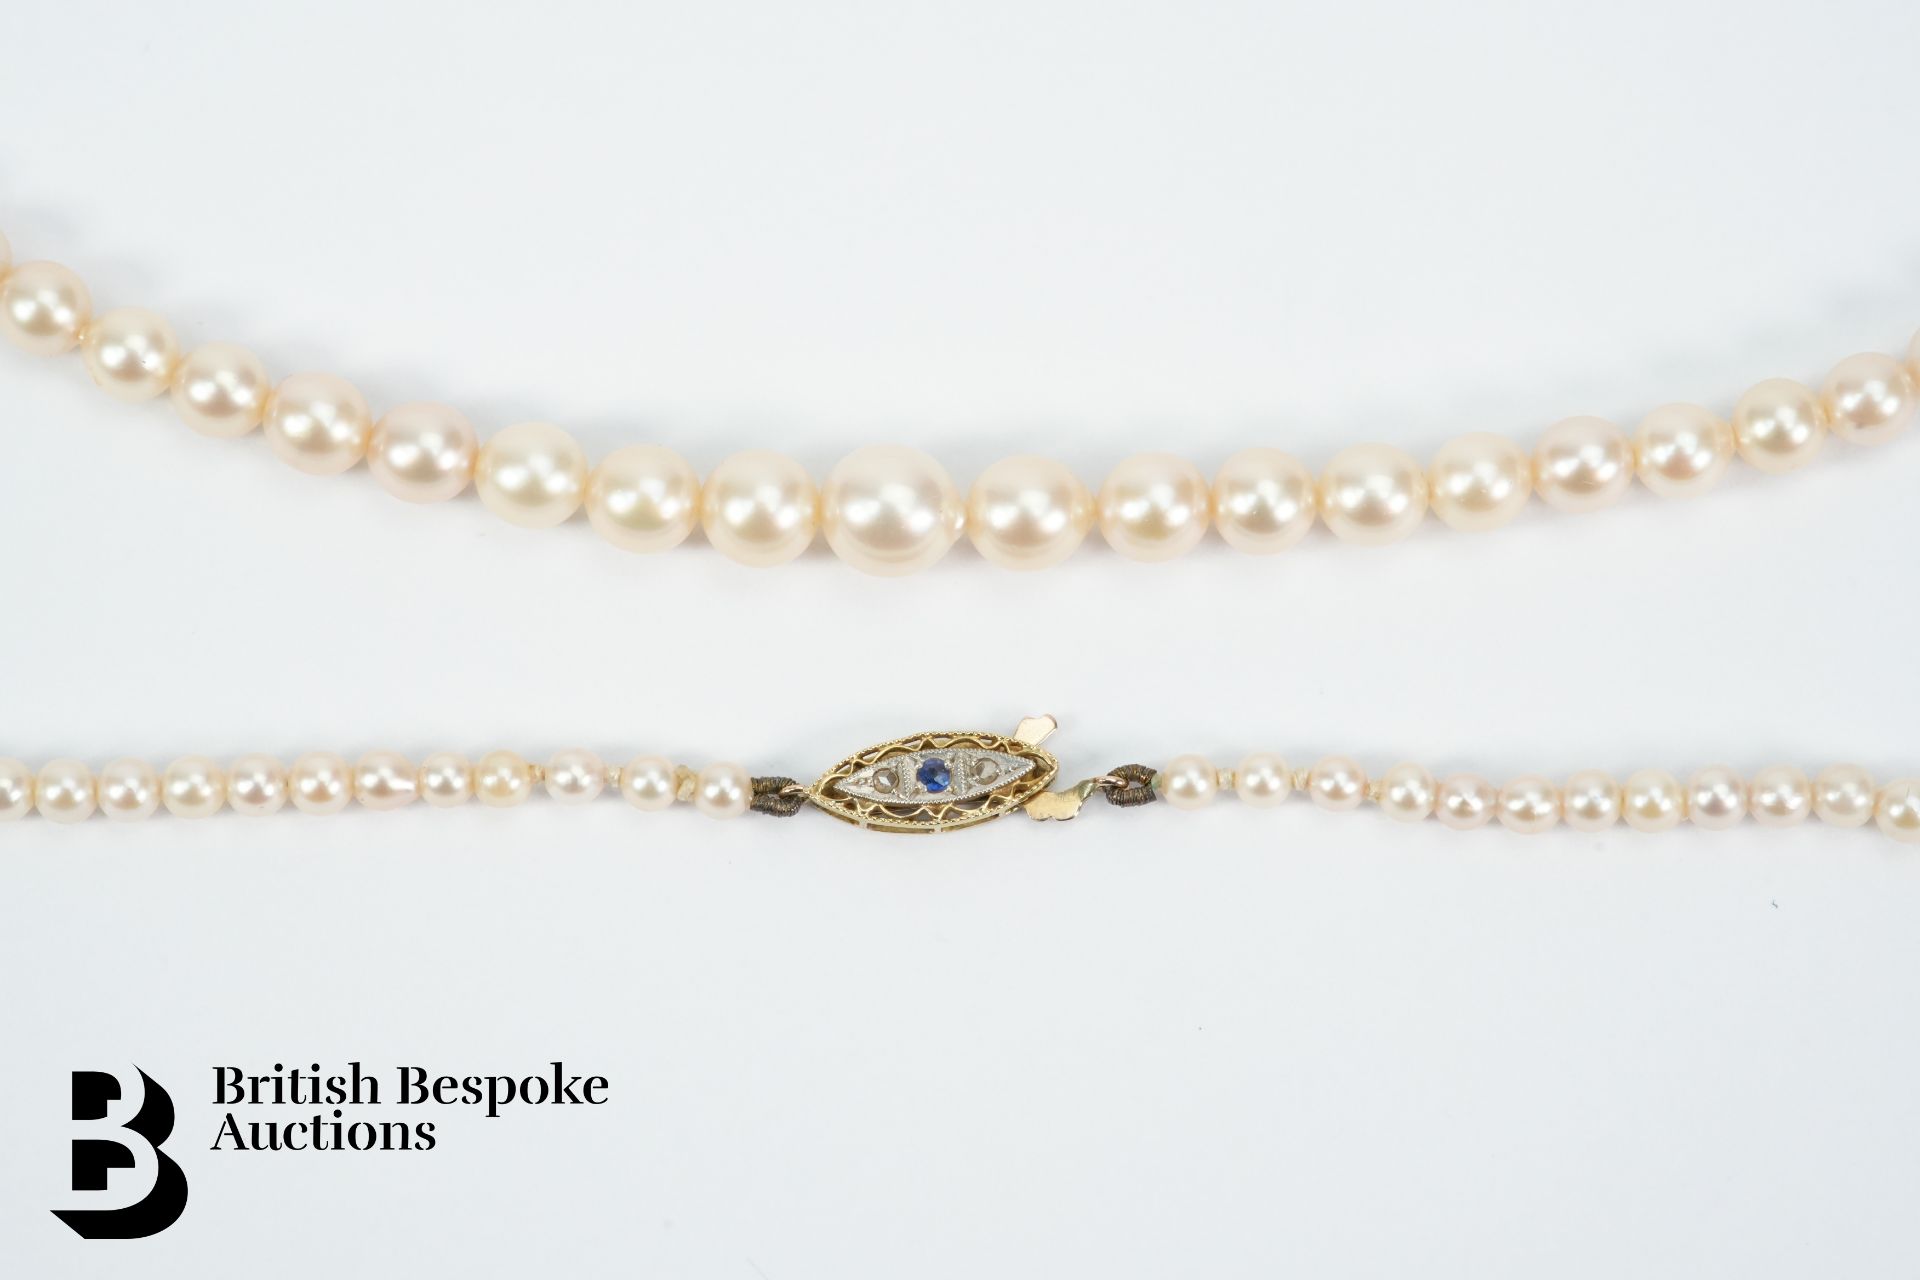 Antique Single Strand of Pearls - Image 6 of 7